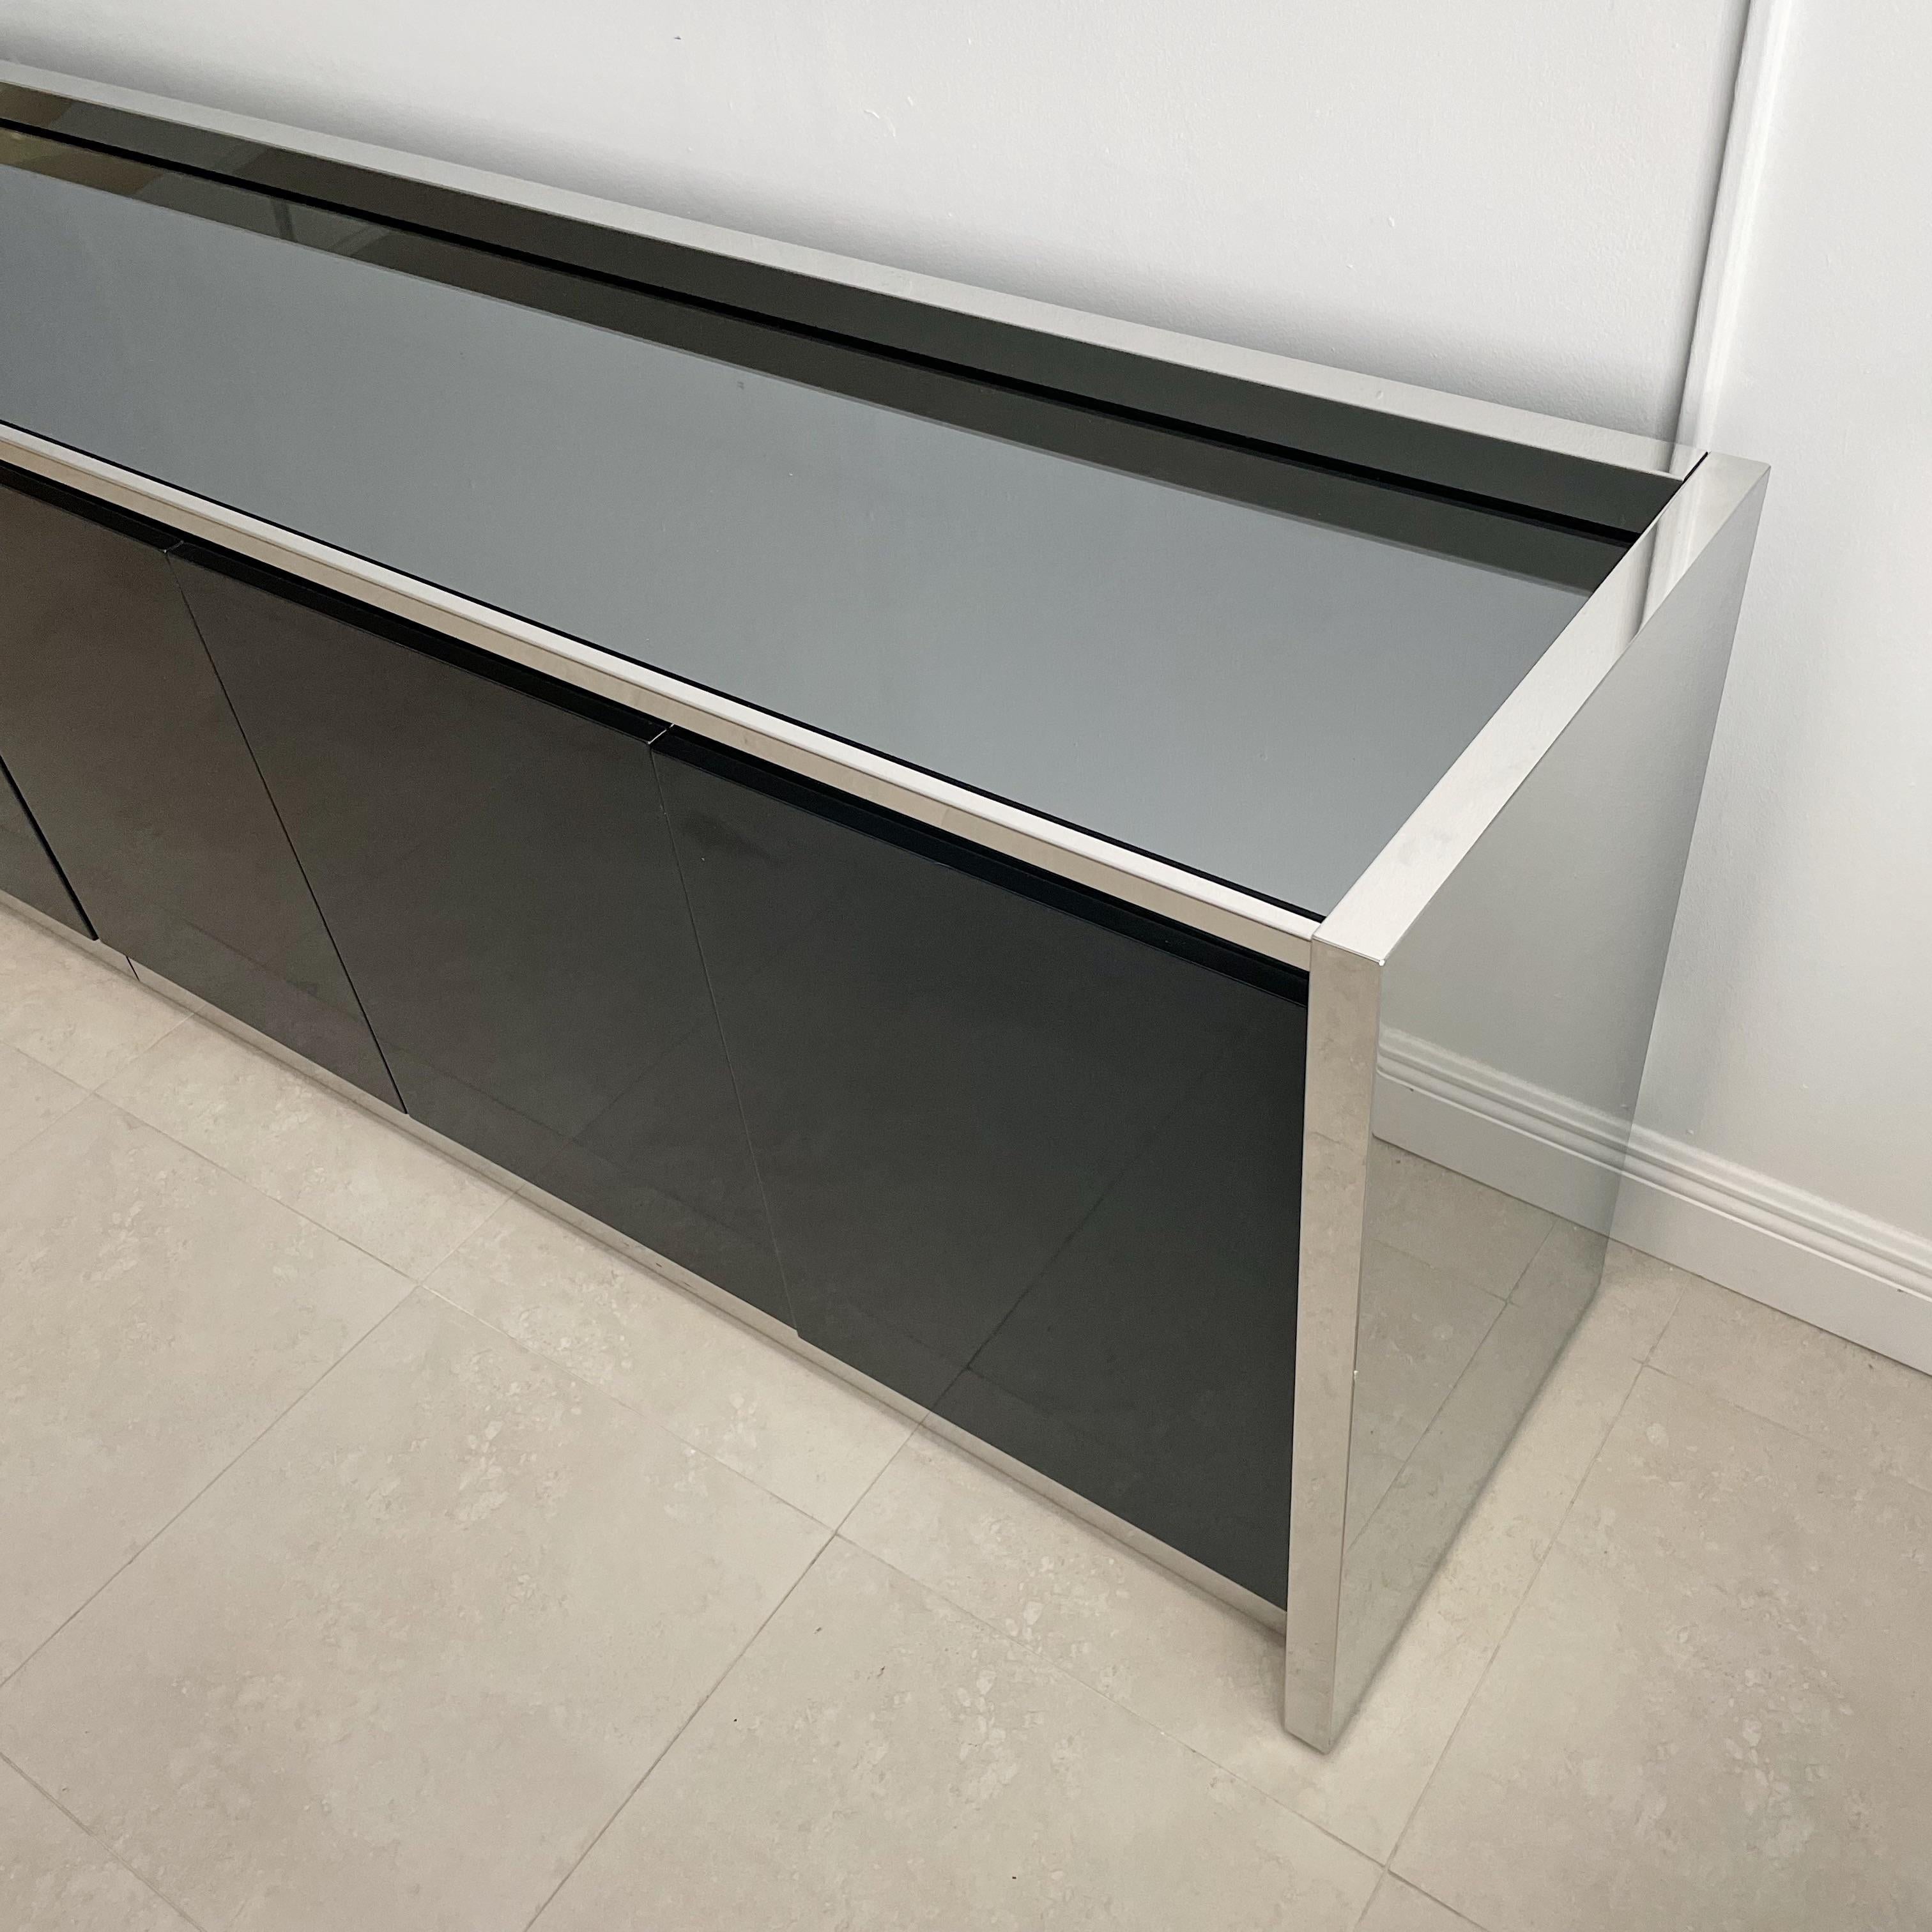 Lacquered Karl Springer Stainless and Black Lacquer Six Door Credenza